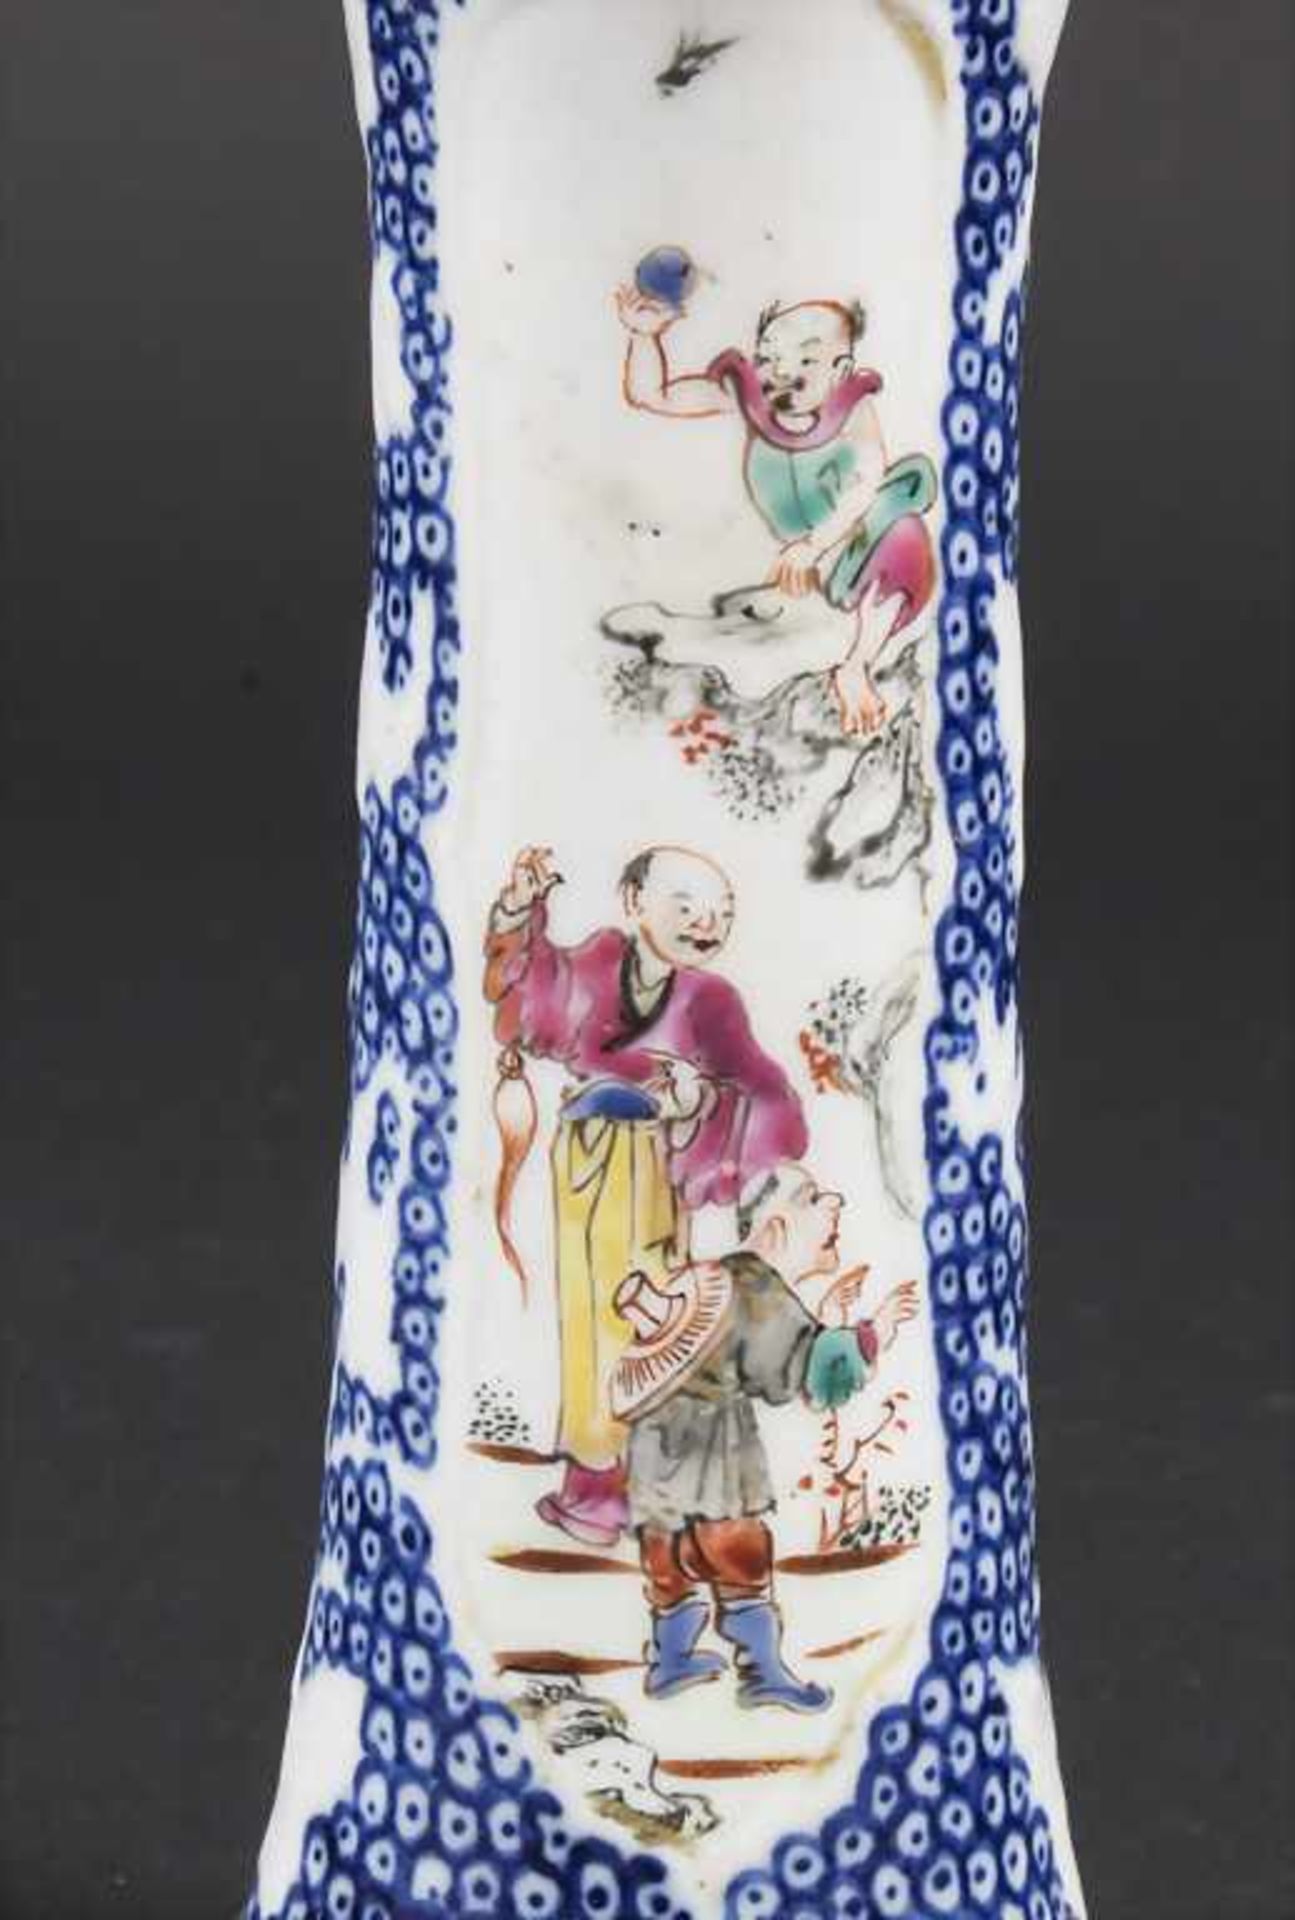 Ziervase / A decorative porcelain vase, China, Qing Dynastie (1644-1911), 18. Jh.Mater - Image 7 of 9